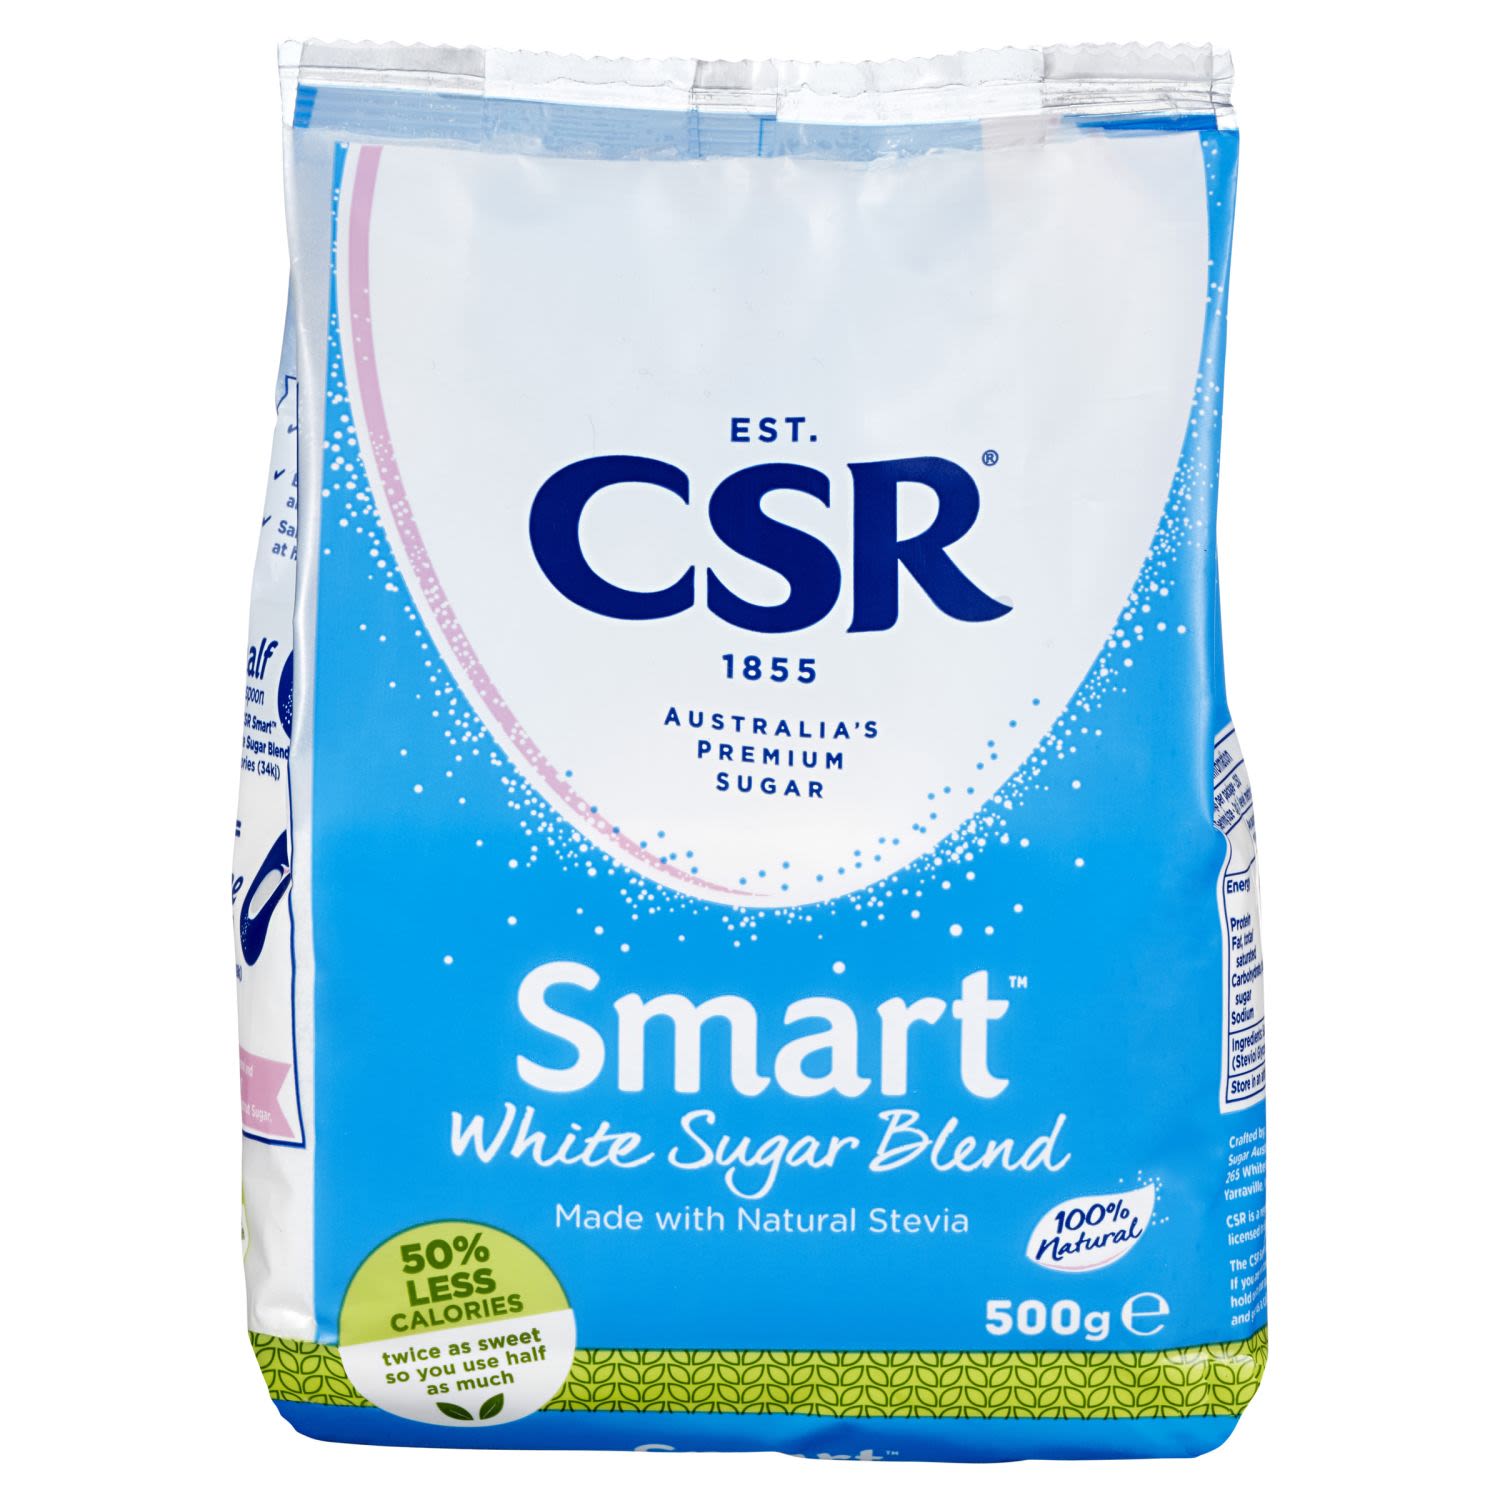 Sugar just got better with CSR White Sugar Blend. Made from a blend of natural sugar with a dash of Stevia, it is a great alternative sweetener for your coffee, baked goods or sauces. It also has 50% less calories with twice the level of sweetness compared to regular sugar, meaning you only need to use half as much.^Half a teaspoon (2g) CSR Smart White Sugar Blend 8 calories (34kJ) = One teaspoon (4g) sugar 16 calories (68kJ)<br /> <br /> <br /><br />Country of Origin: Proudly Australian made